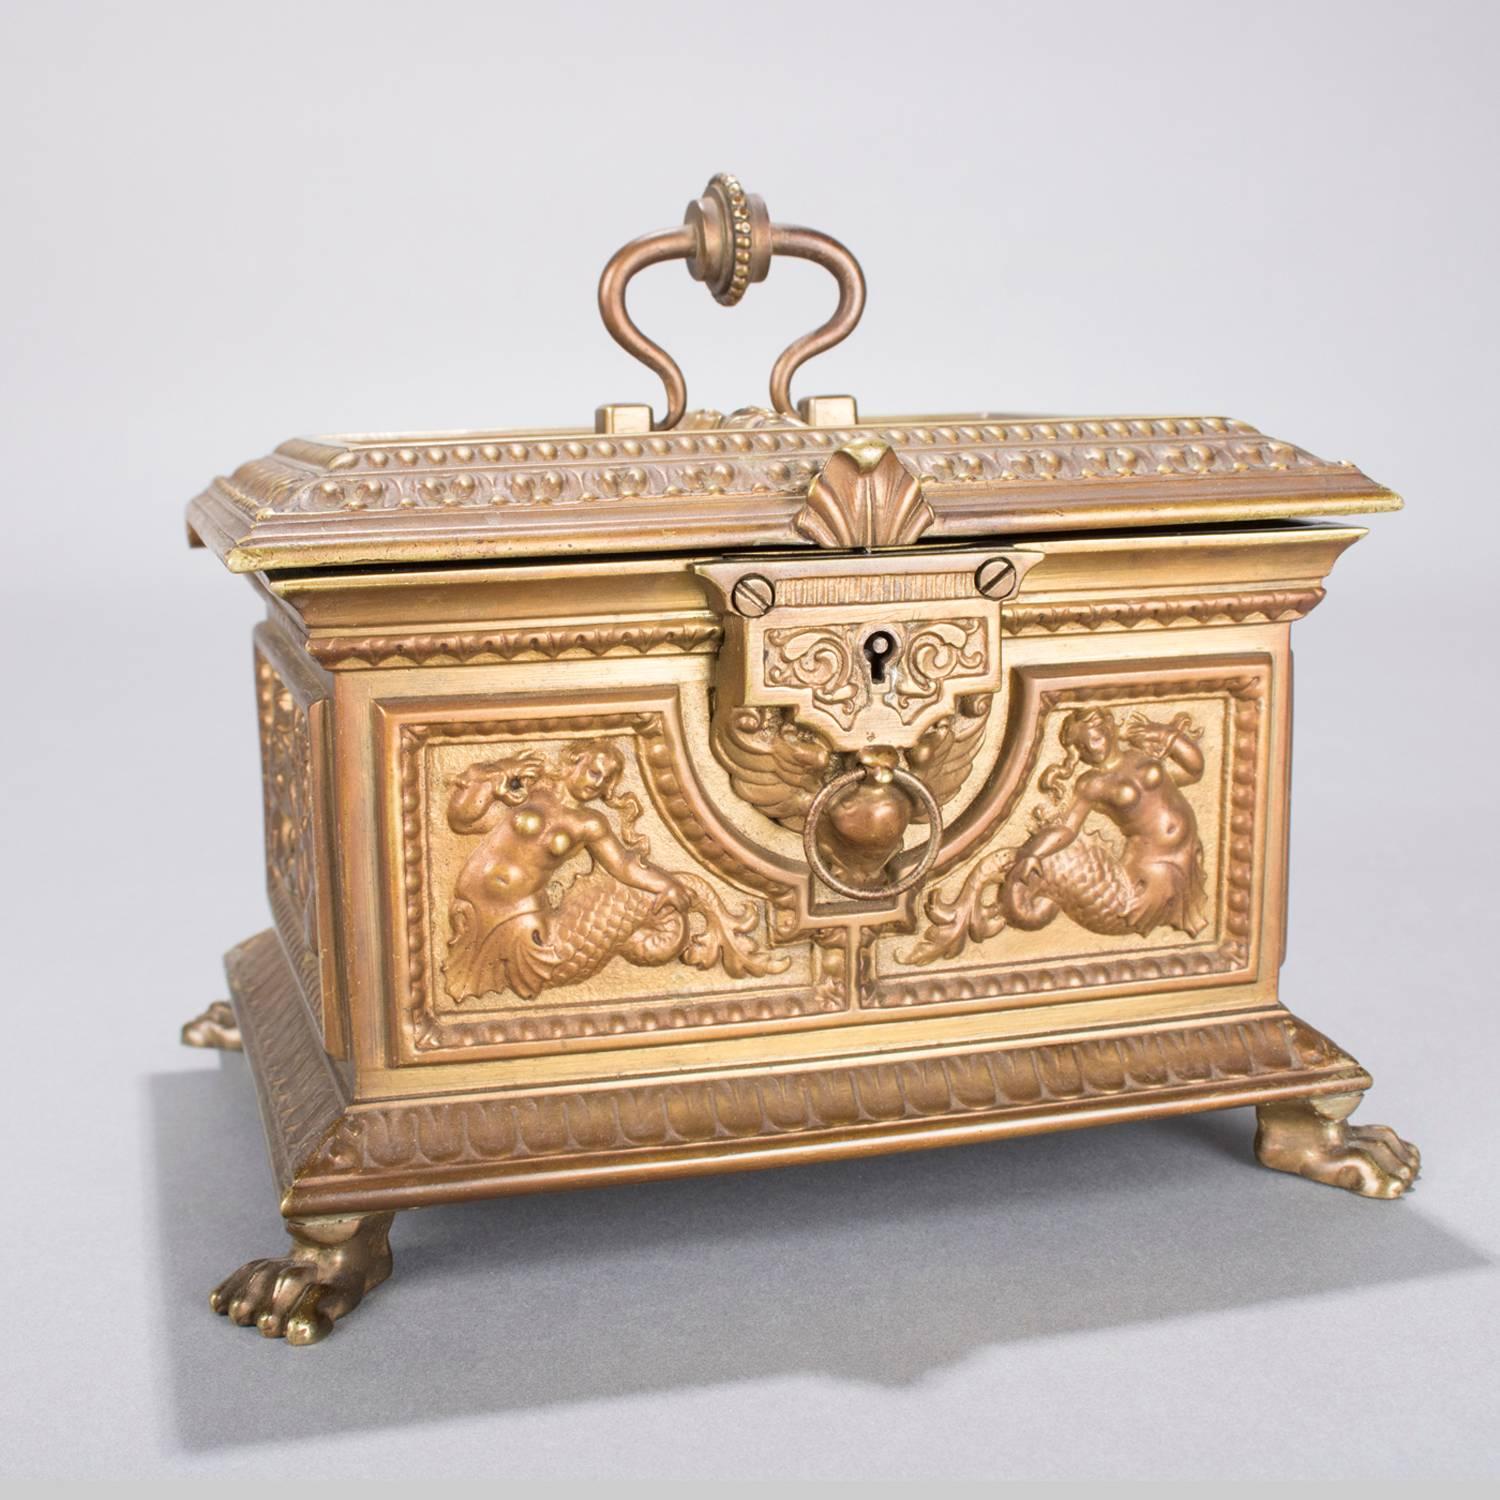 Antique French neoclassical jewelry casket (dresser box) is bronzed white metal with high relilef Greek Mythological creatures including Echidna (half woman and half-snake like creature), Cecrops and Wind God, beaded and tulip bordering; top is